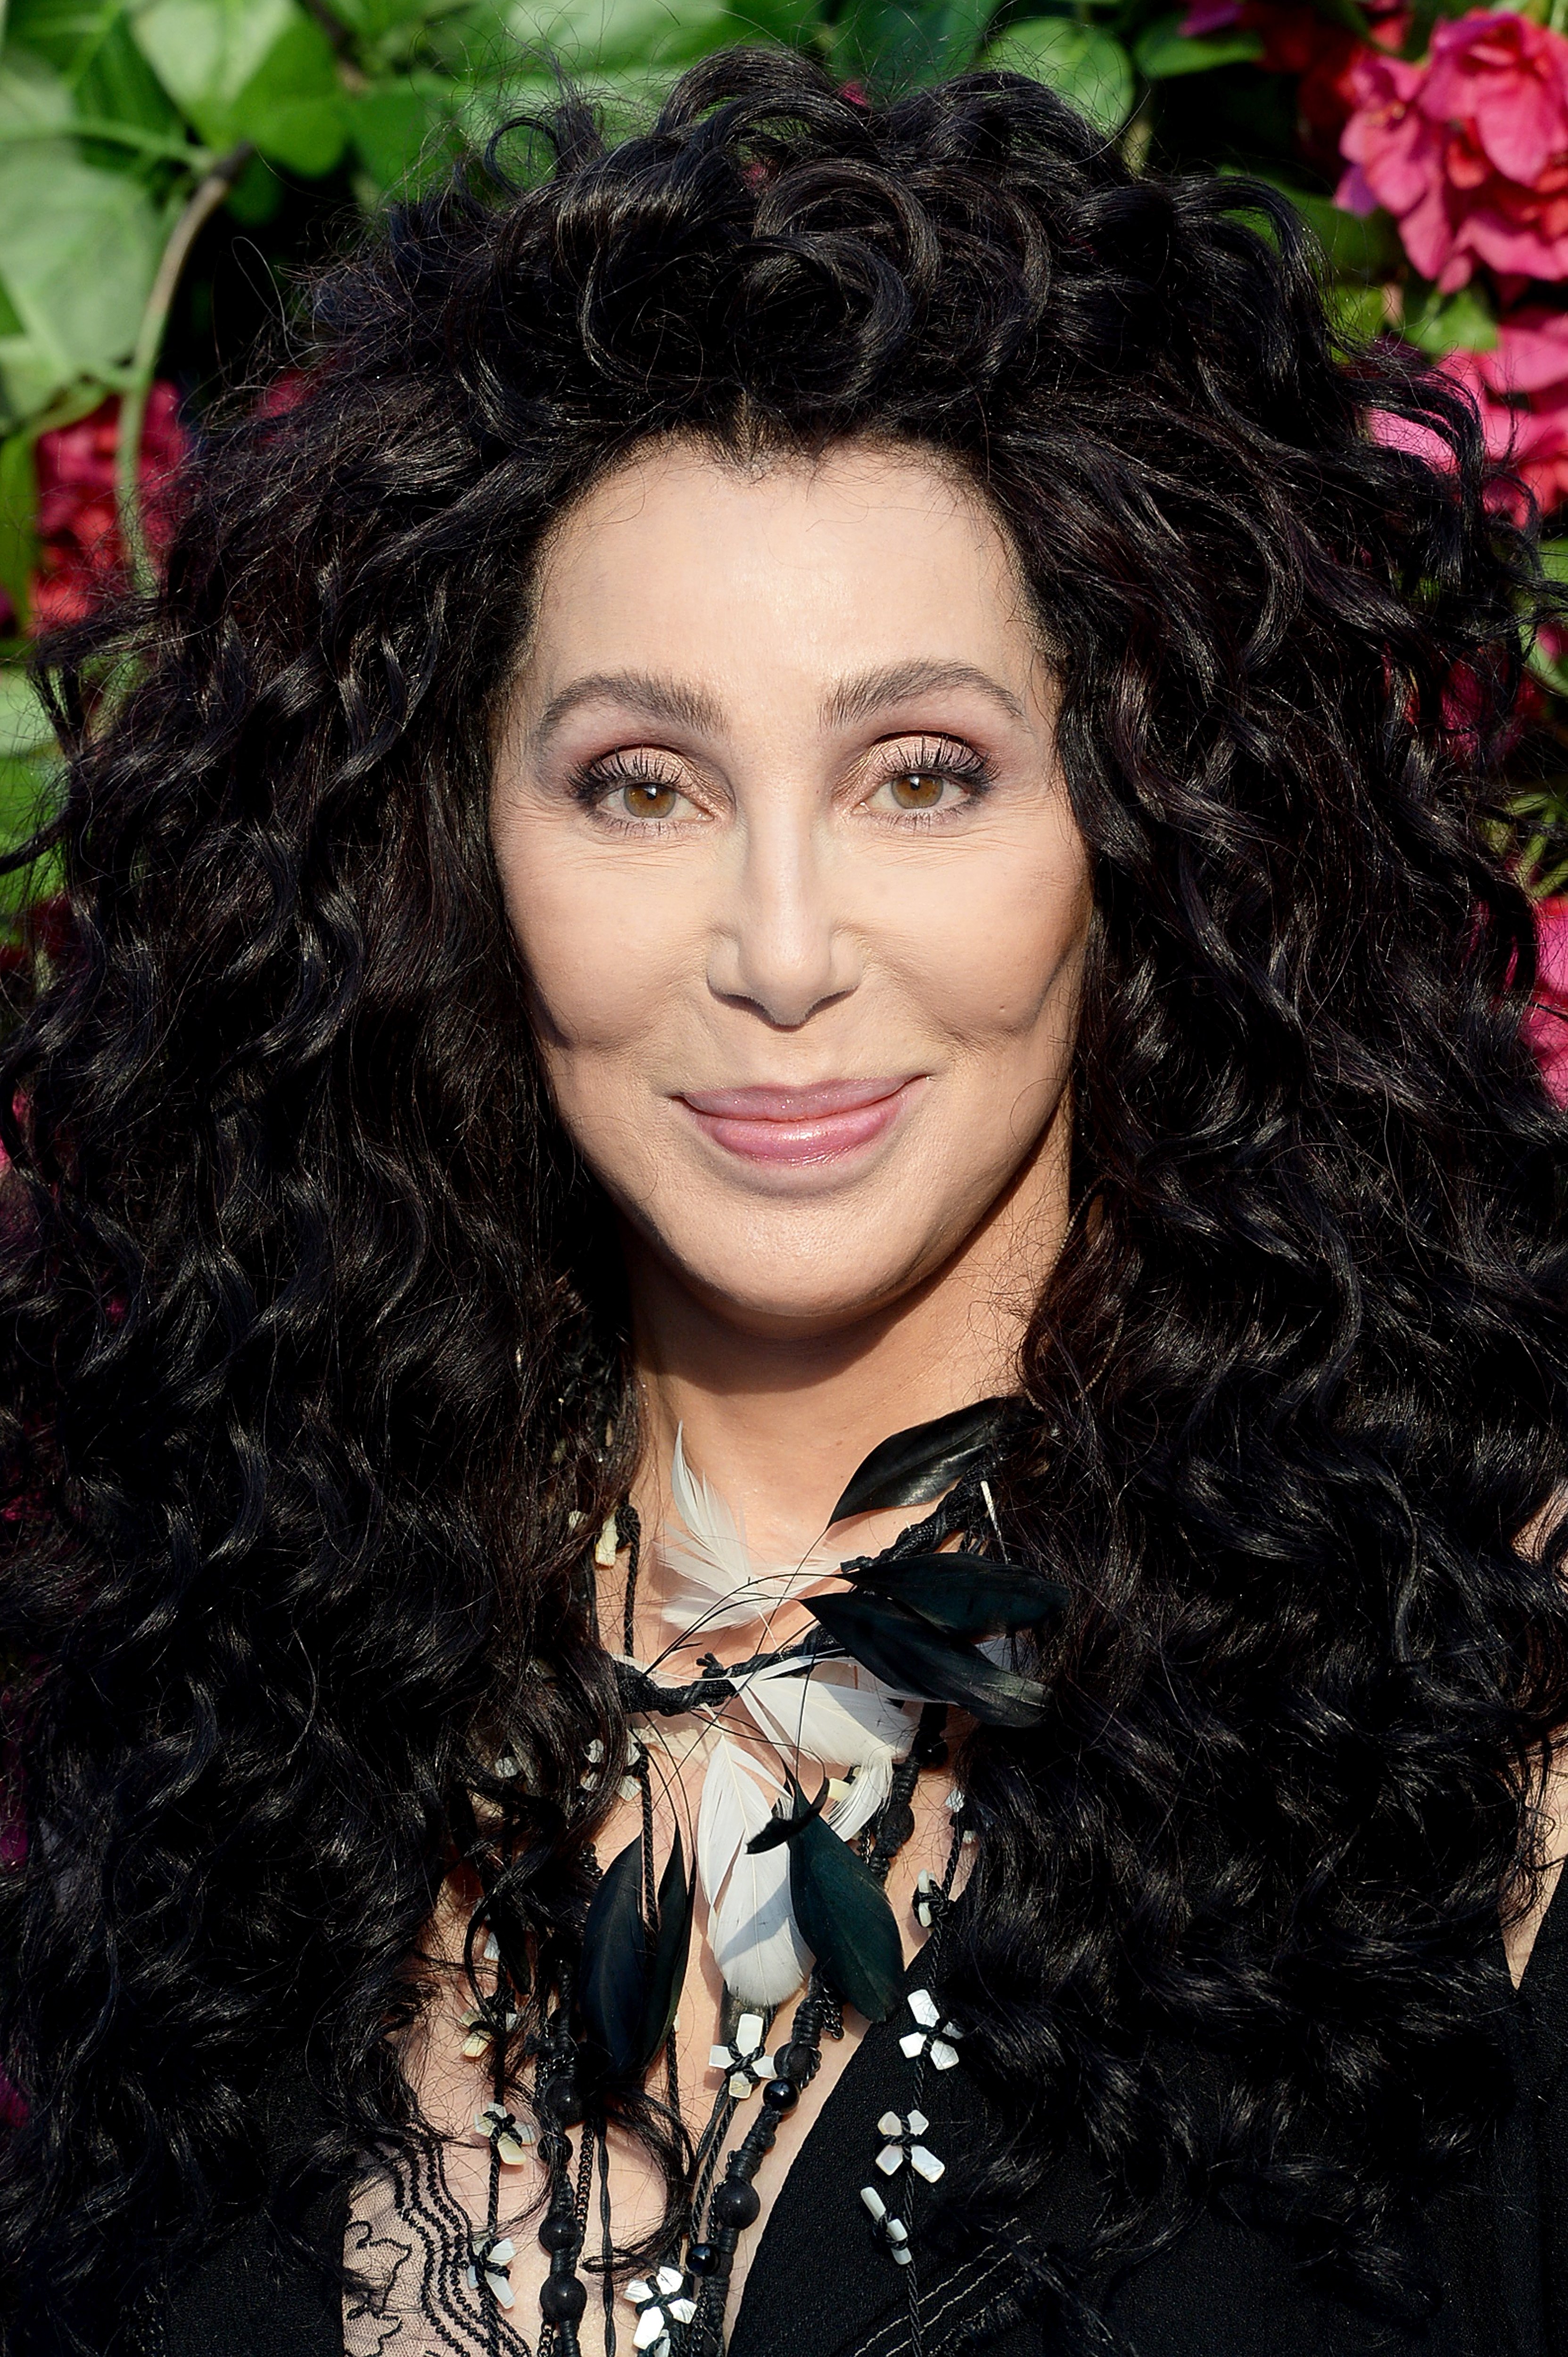 Cher attends the UK Premiere of "Mamma Mia! Here We Go Again" at Eventim Apollo on July 16, 2018 in London, England. | Source: Getty Images